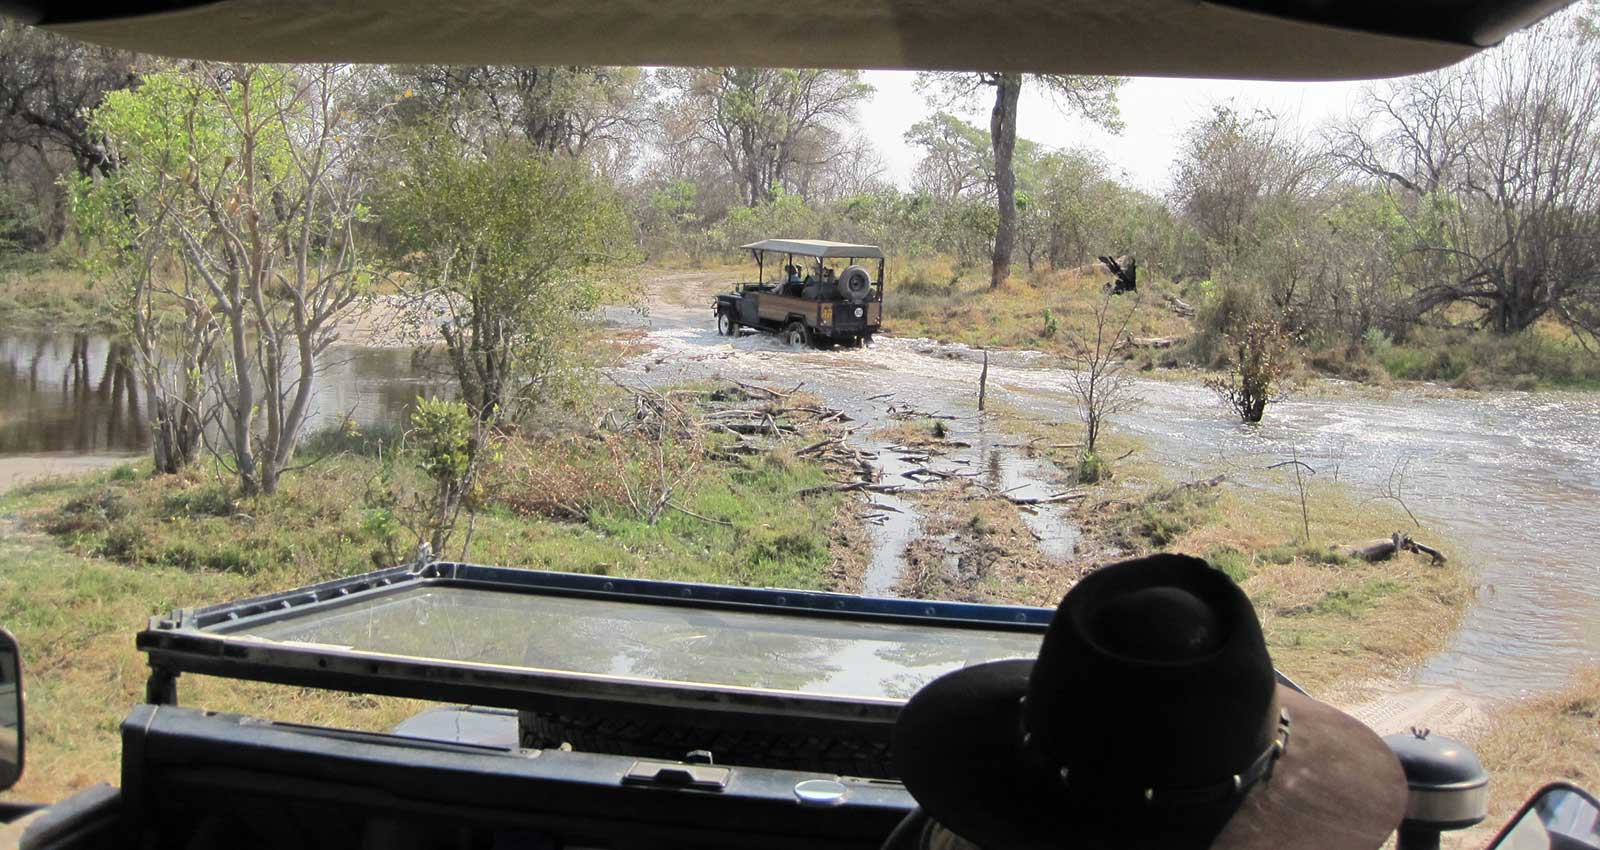 On game drive with Masson Safaris in Moremi Game Reserve